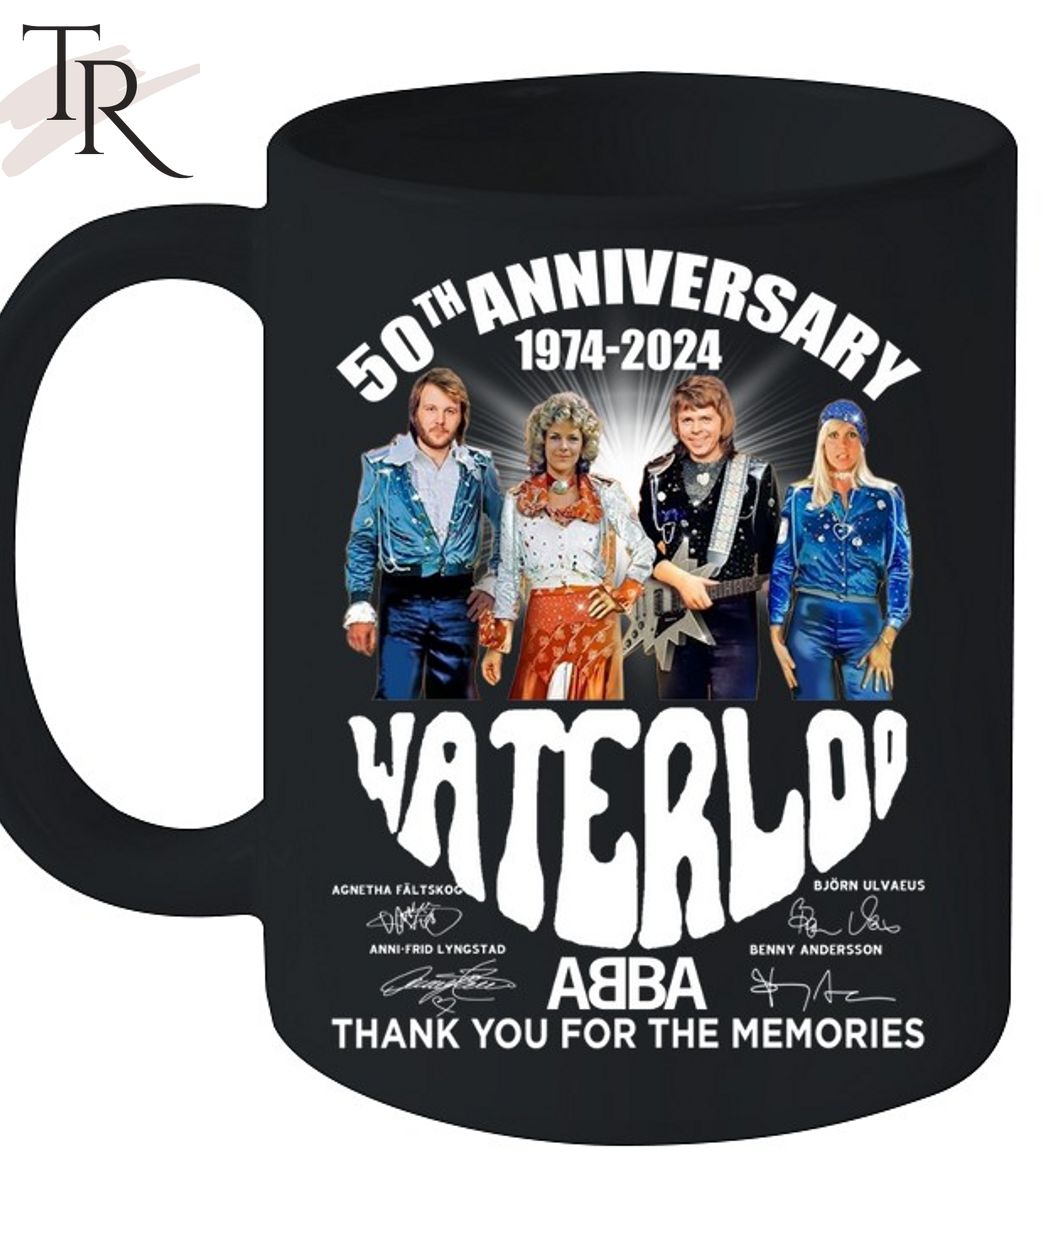 50th Anniversary 1974-2024 Waterloo ABBA Thank You For The Memories T-Shirt